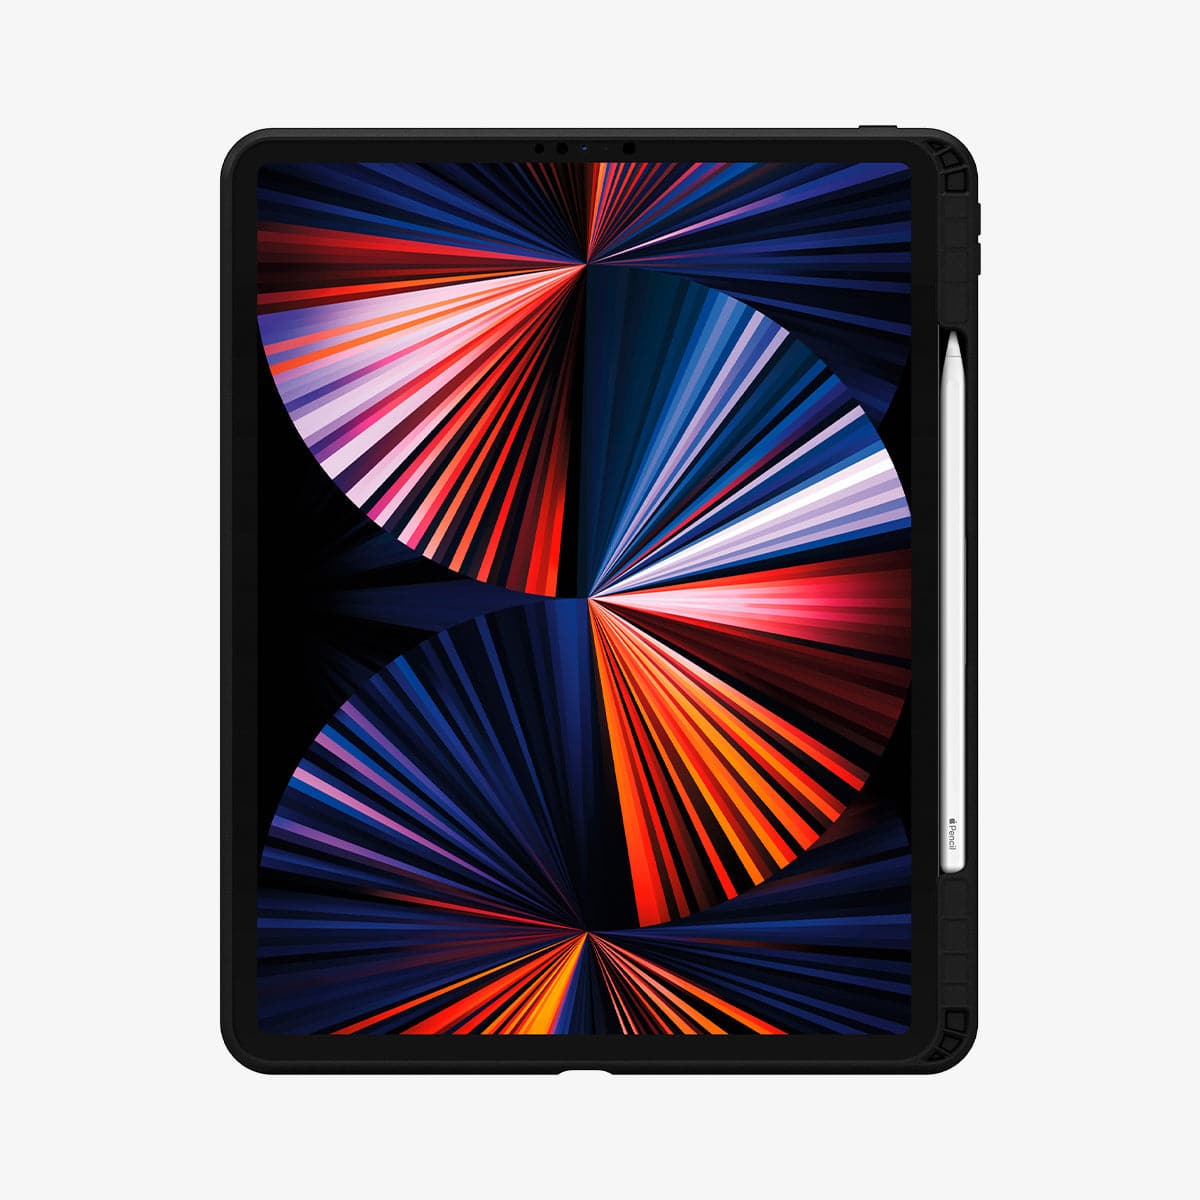 ACS02881 - iPad Pro 12.9" Case Tough Armor Pro in black showing the front